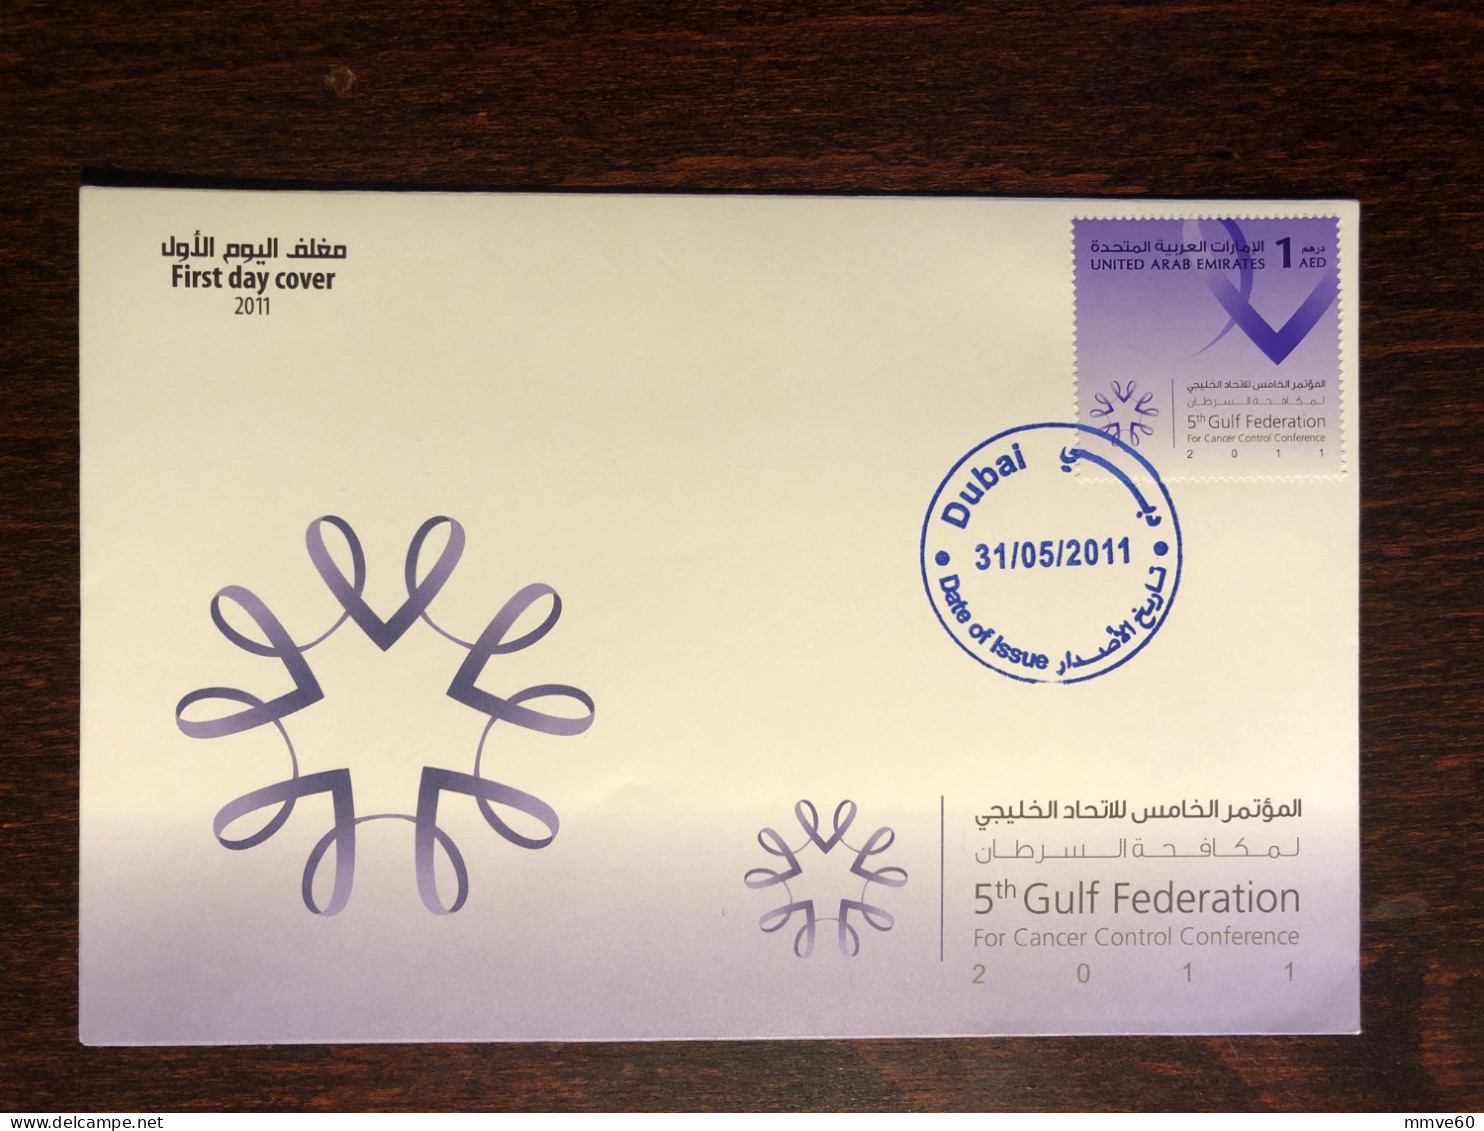 UAE FDC COVER 2011 YEAR CANCER ONCOLOGY HEALTH MEDICINE STAMPS - Emiratos Árabes Unidos